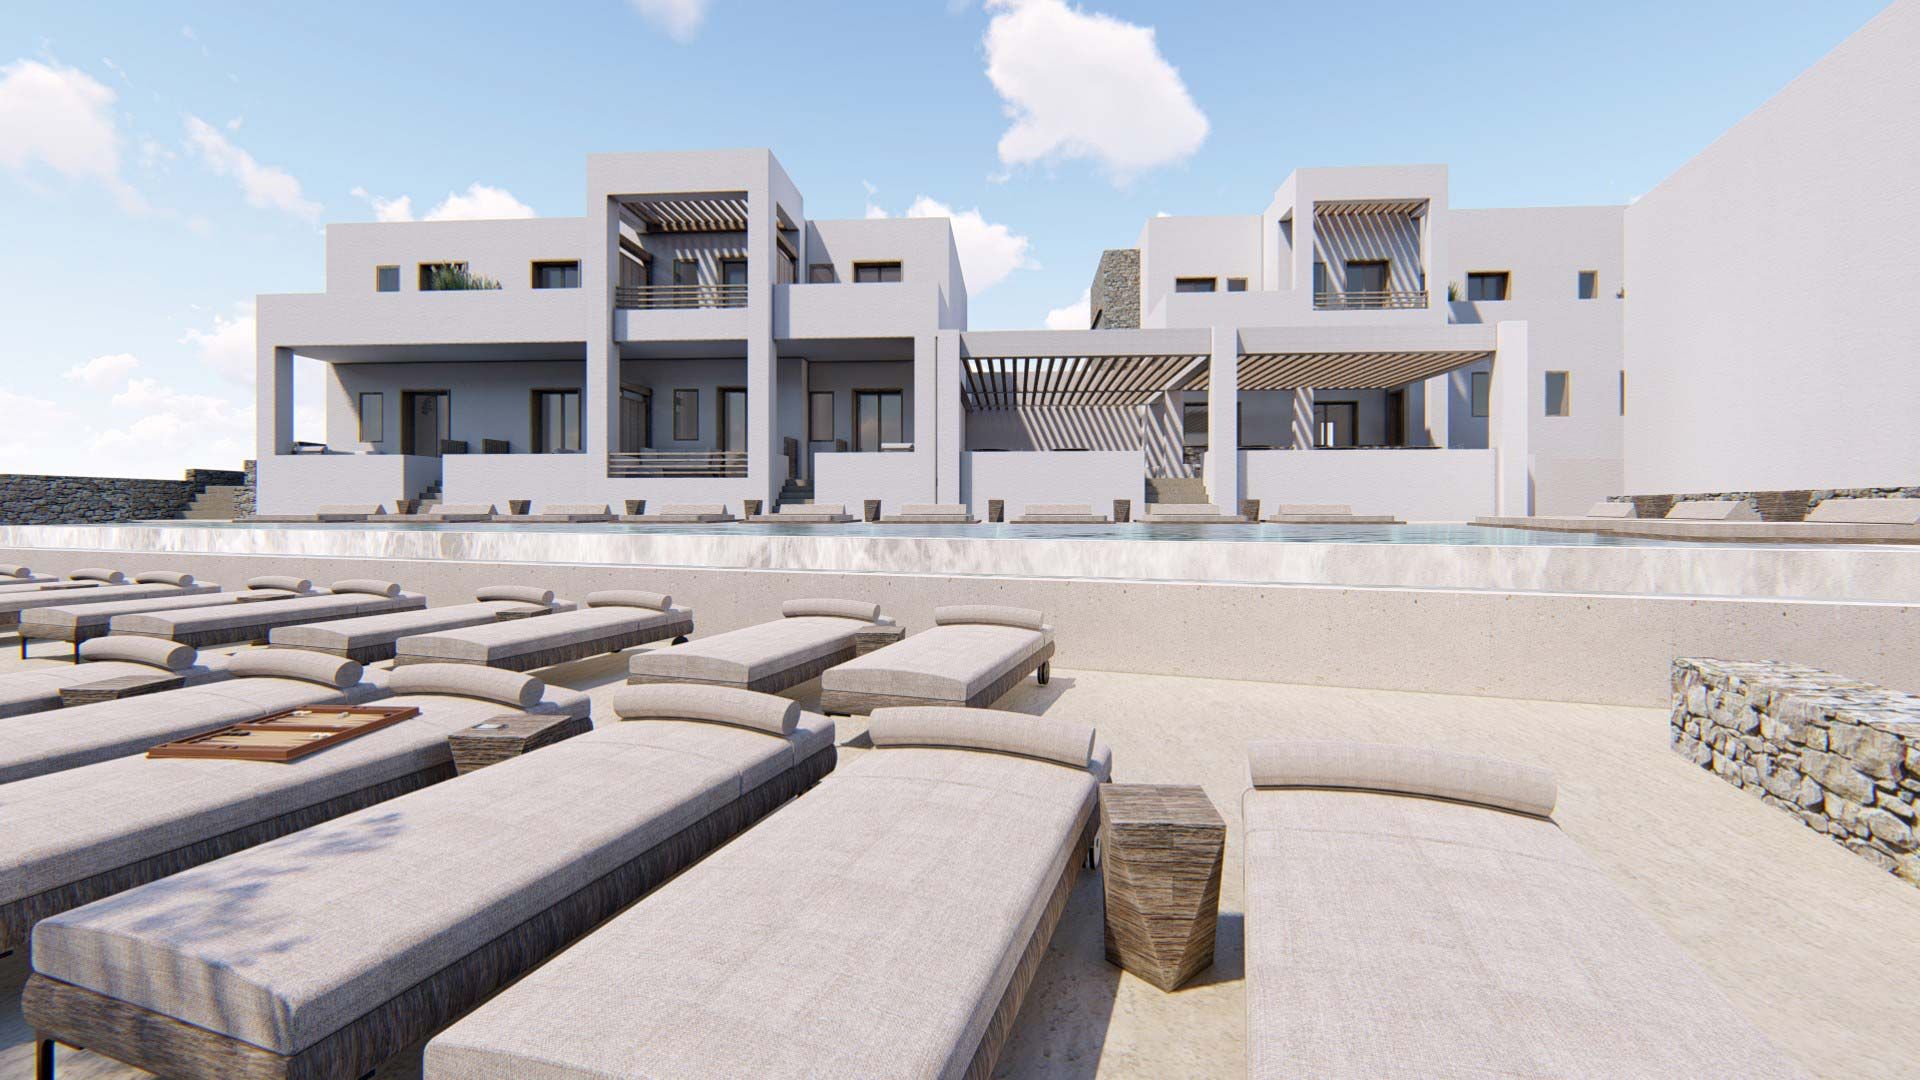 Study & Construction of a 5-star Hotel, Sotires, Paros